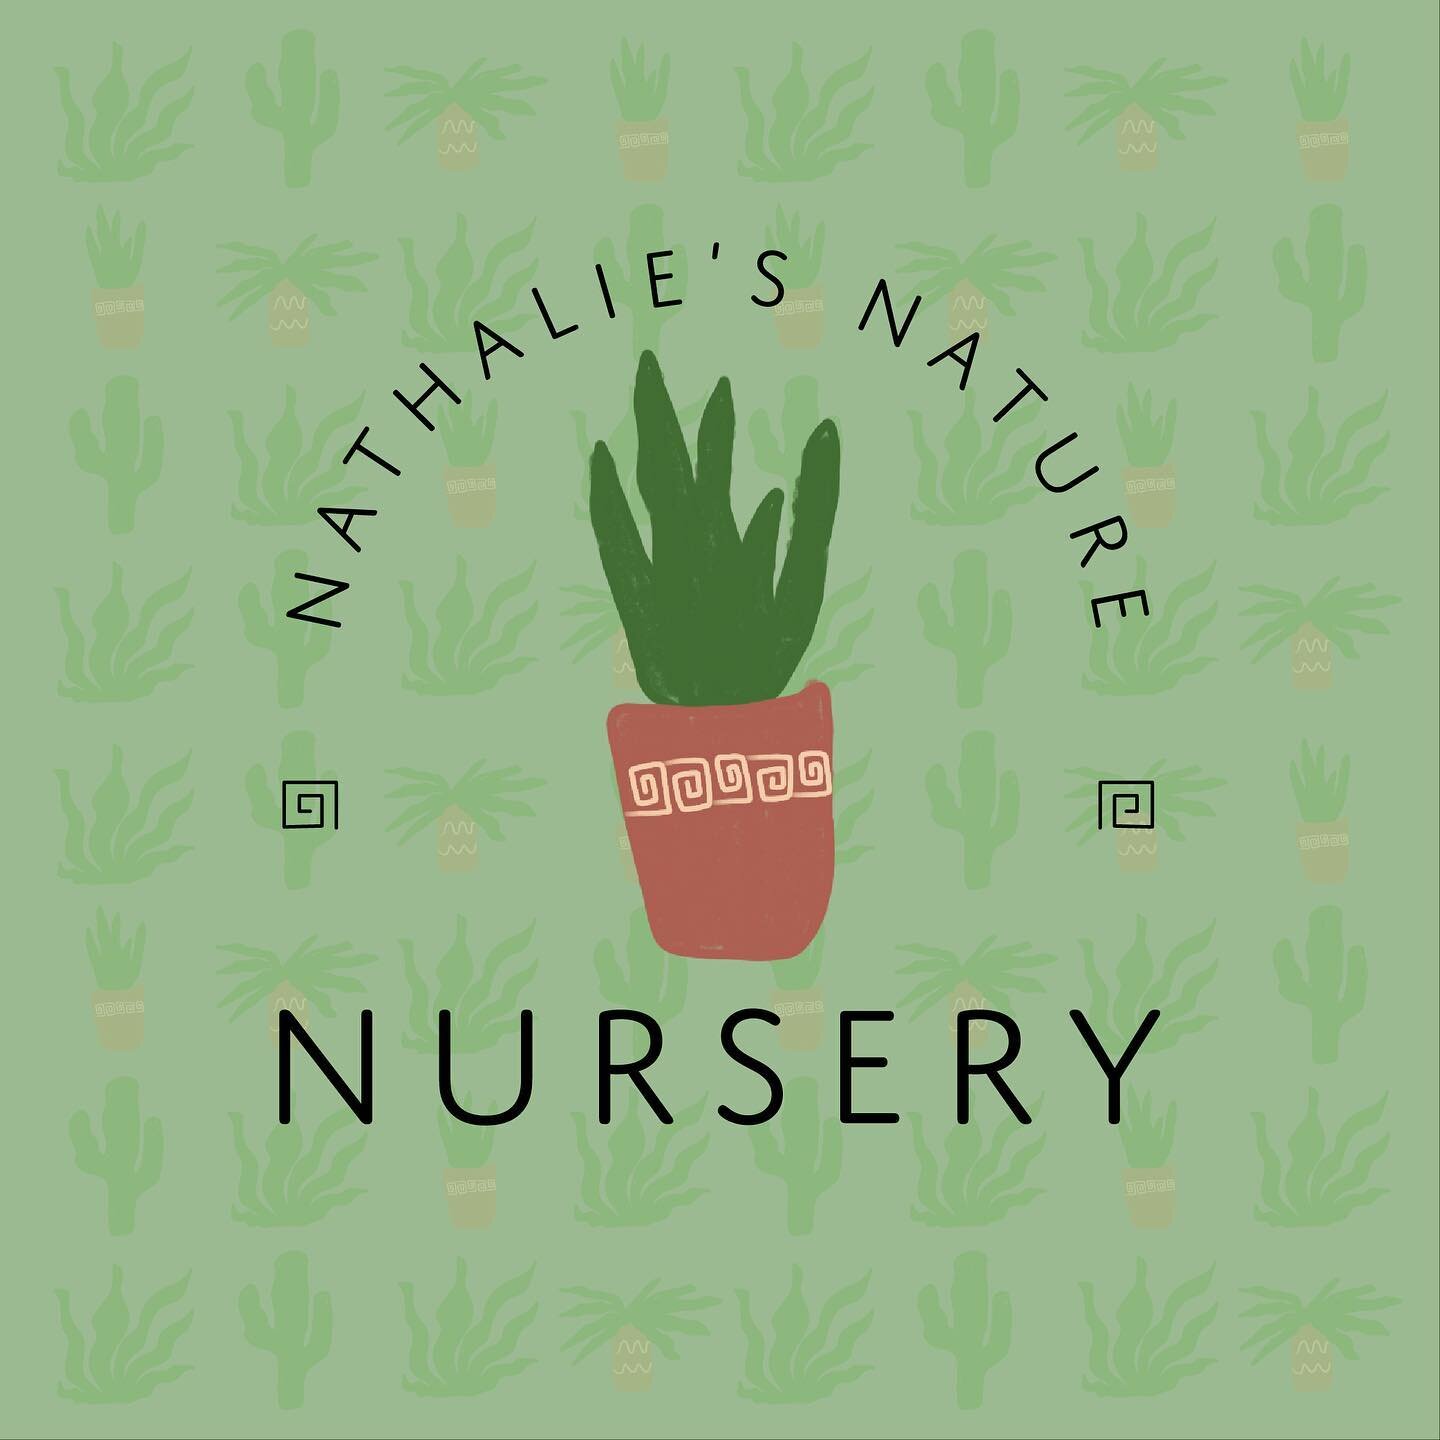 Nathalie&rsquo;s Nature Nursery - the cutest fake plant shop based off my sister and her love for plants! I love the color palette and that was able to draw these cute little plant graphics. This is the sort of branding collection you can get if you 